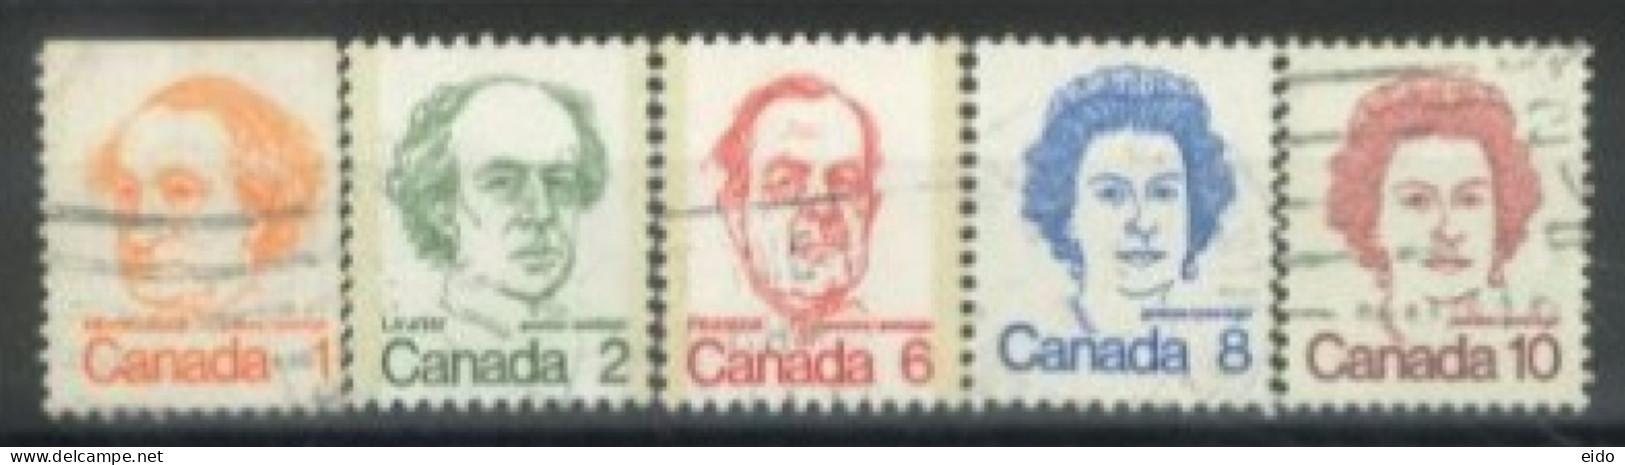 CANADA - 1972, CELEBRITIES STAMPS SET OF 5, USED. - Usados